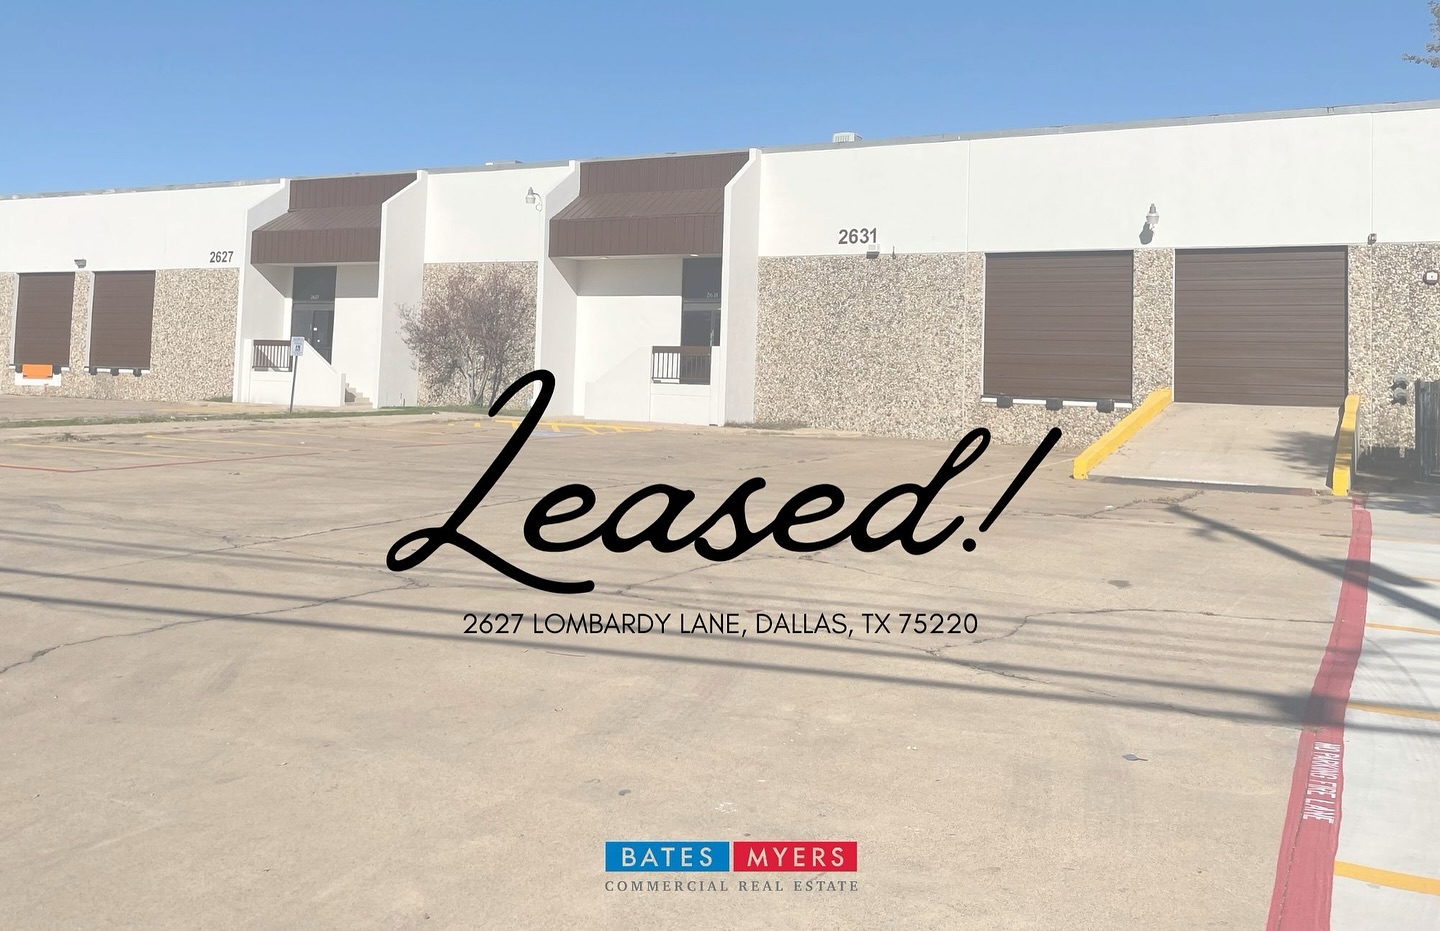 Just Leased! 📍2627 Lombardy Lane, Dallas, TX 75220 Brokers: Floyd...